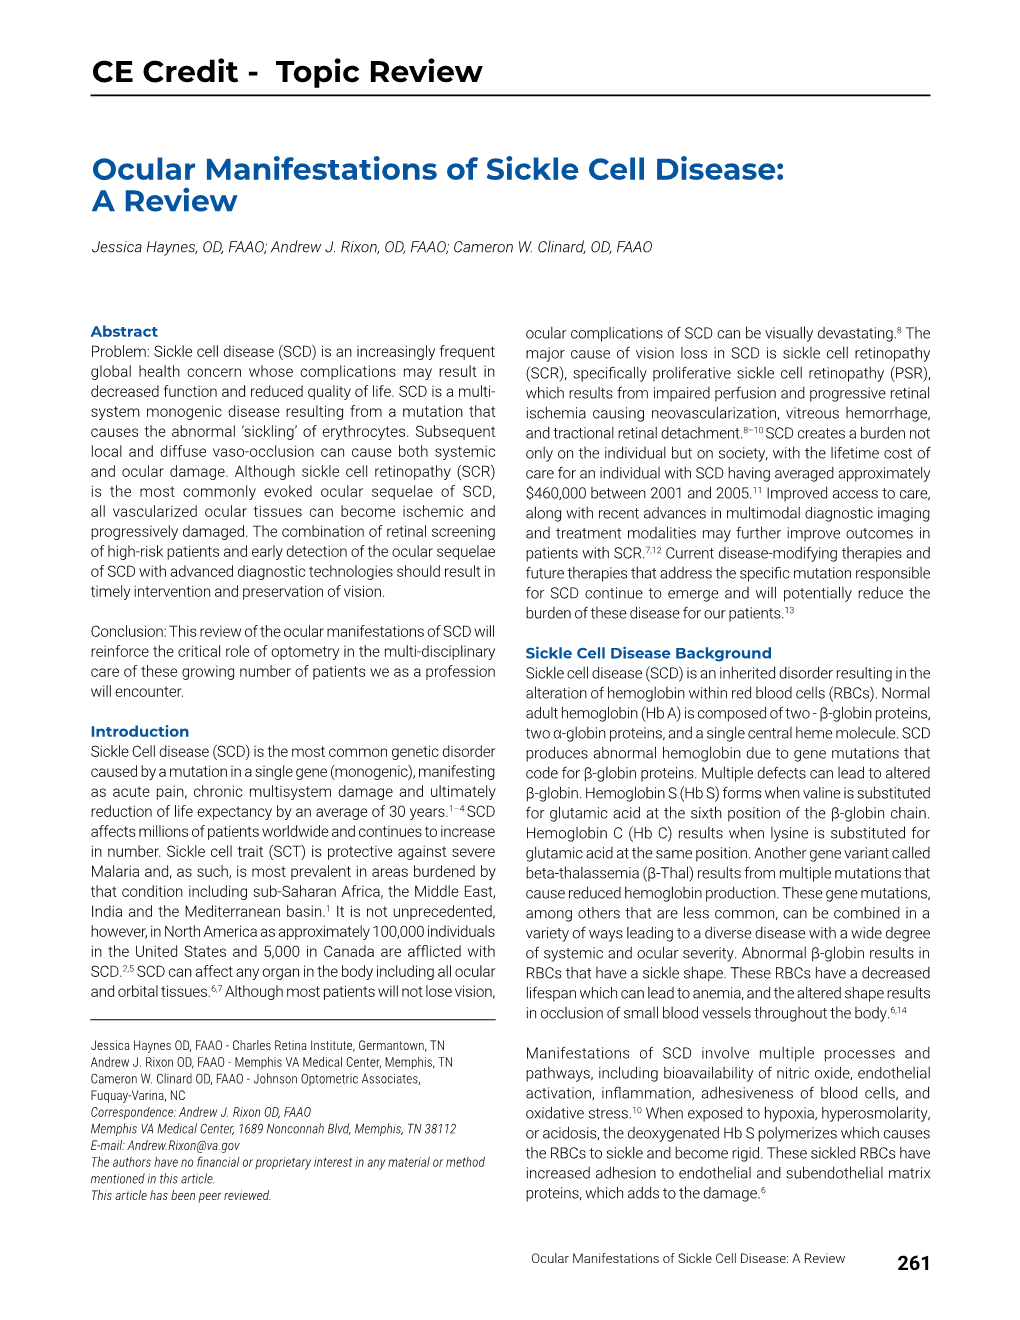 Ocular Manifestations of Sickle Cell Disease: a Review